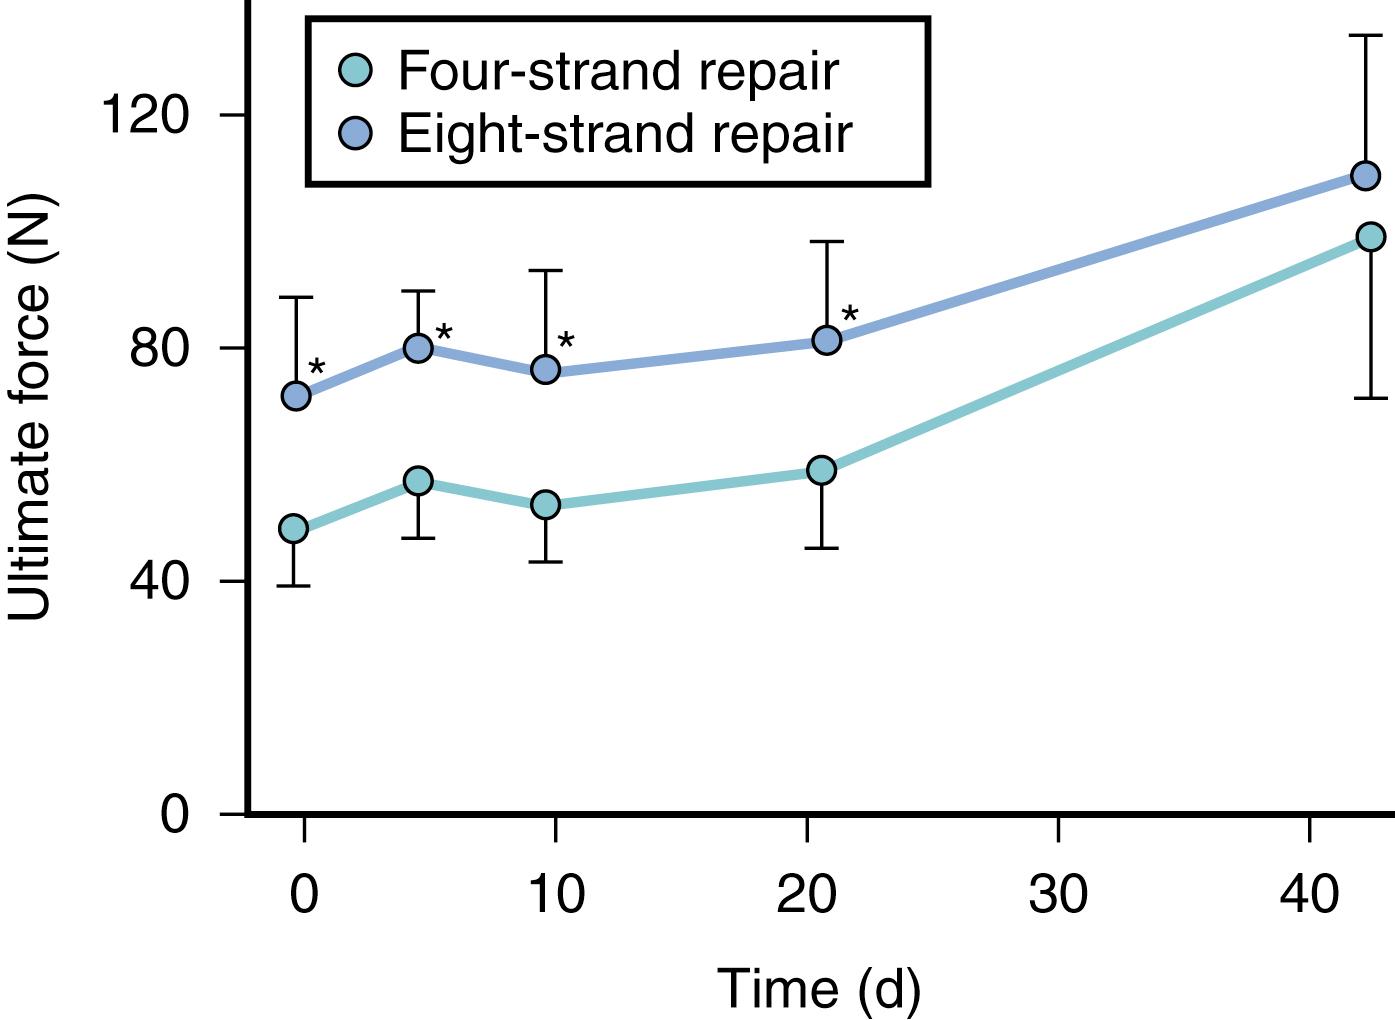 Fig. 6.9, Comparison of ultimate force versus time between suture techniques from 0 to 21 days. The repairs with the eight-strand technique were significantly stronger than the repairs that used the four-strand technique. Asterisks denote a significant difference between the eight-strand and four-strand techniques at P < .05.